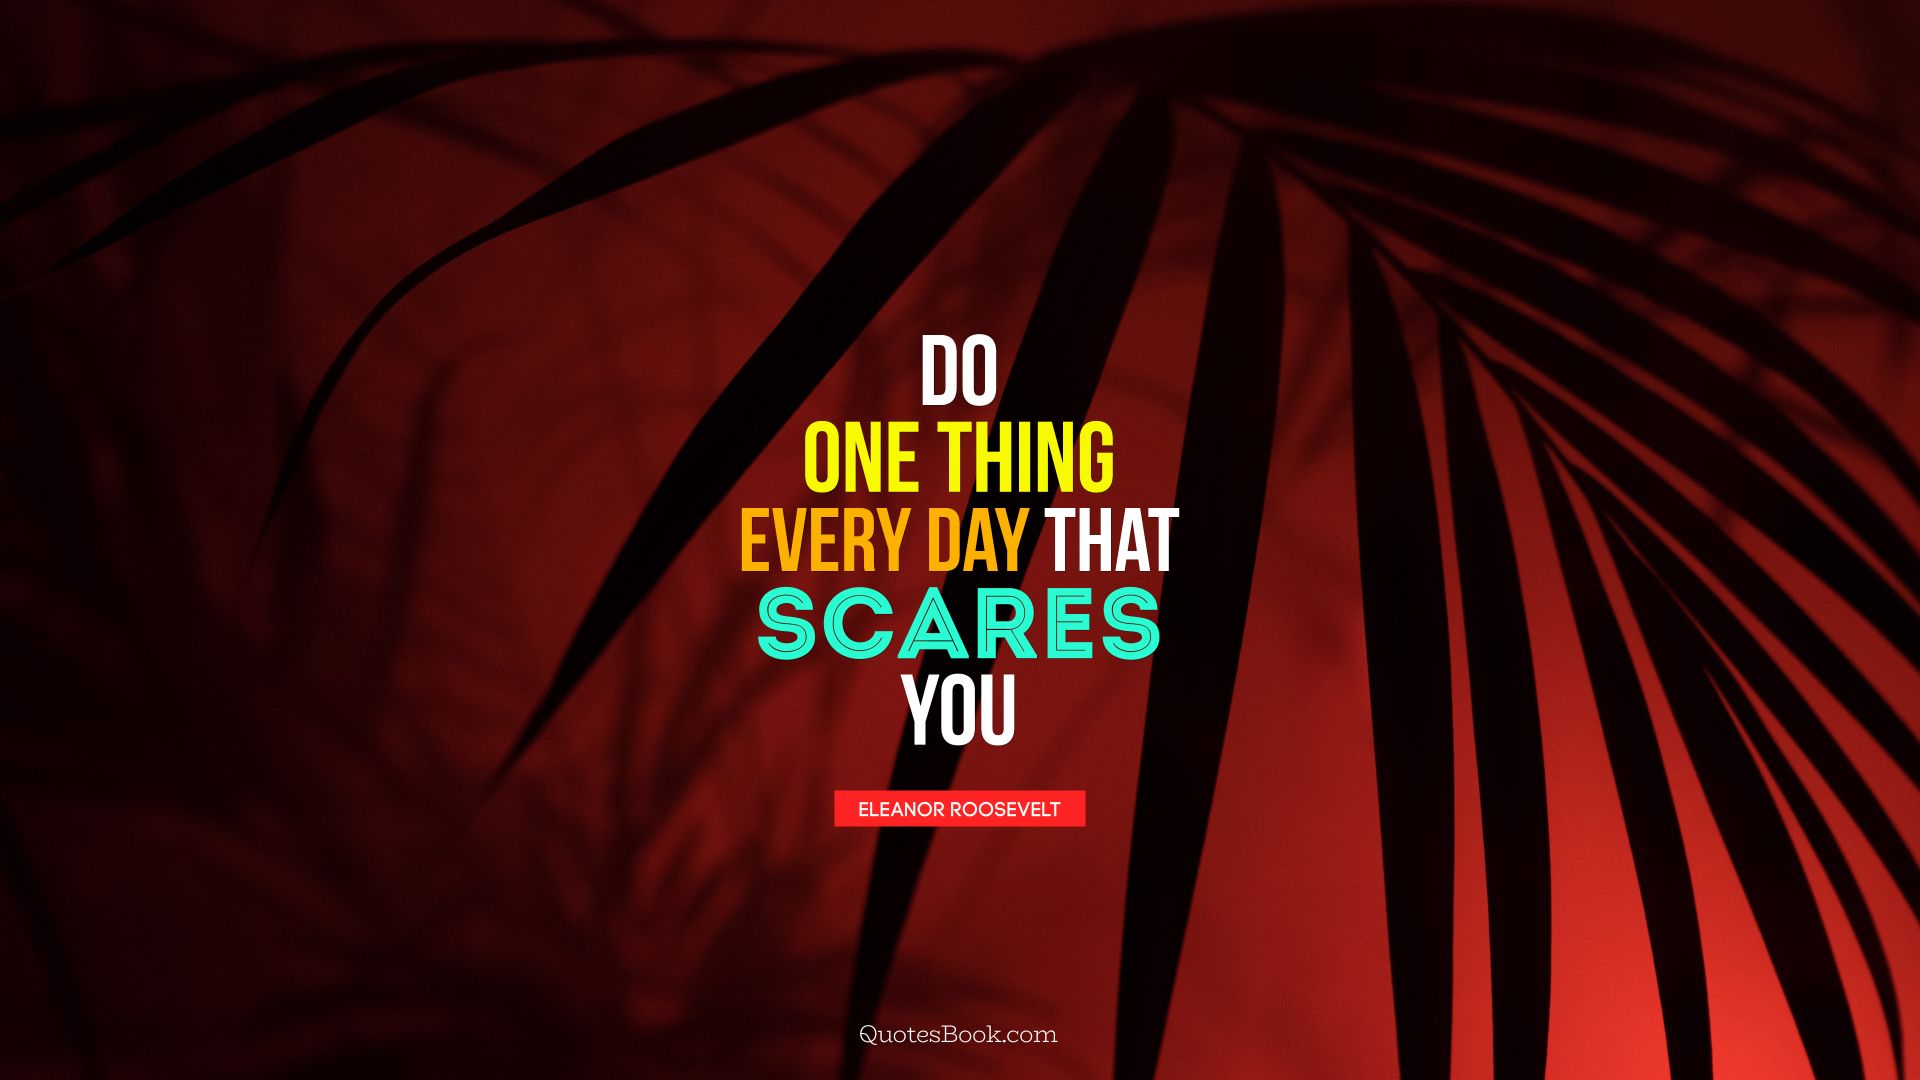 Do one thing every day that scares you. - Quote by Eleanor Roosevelt